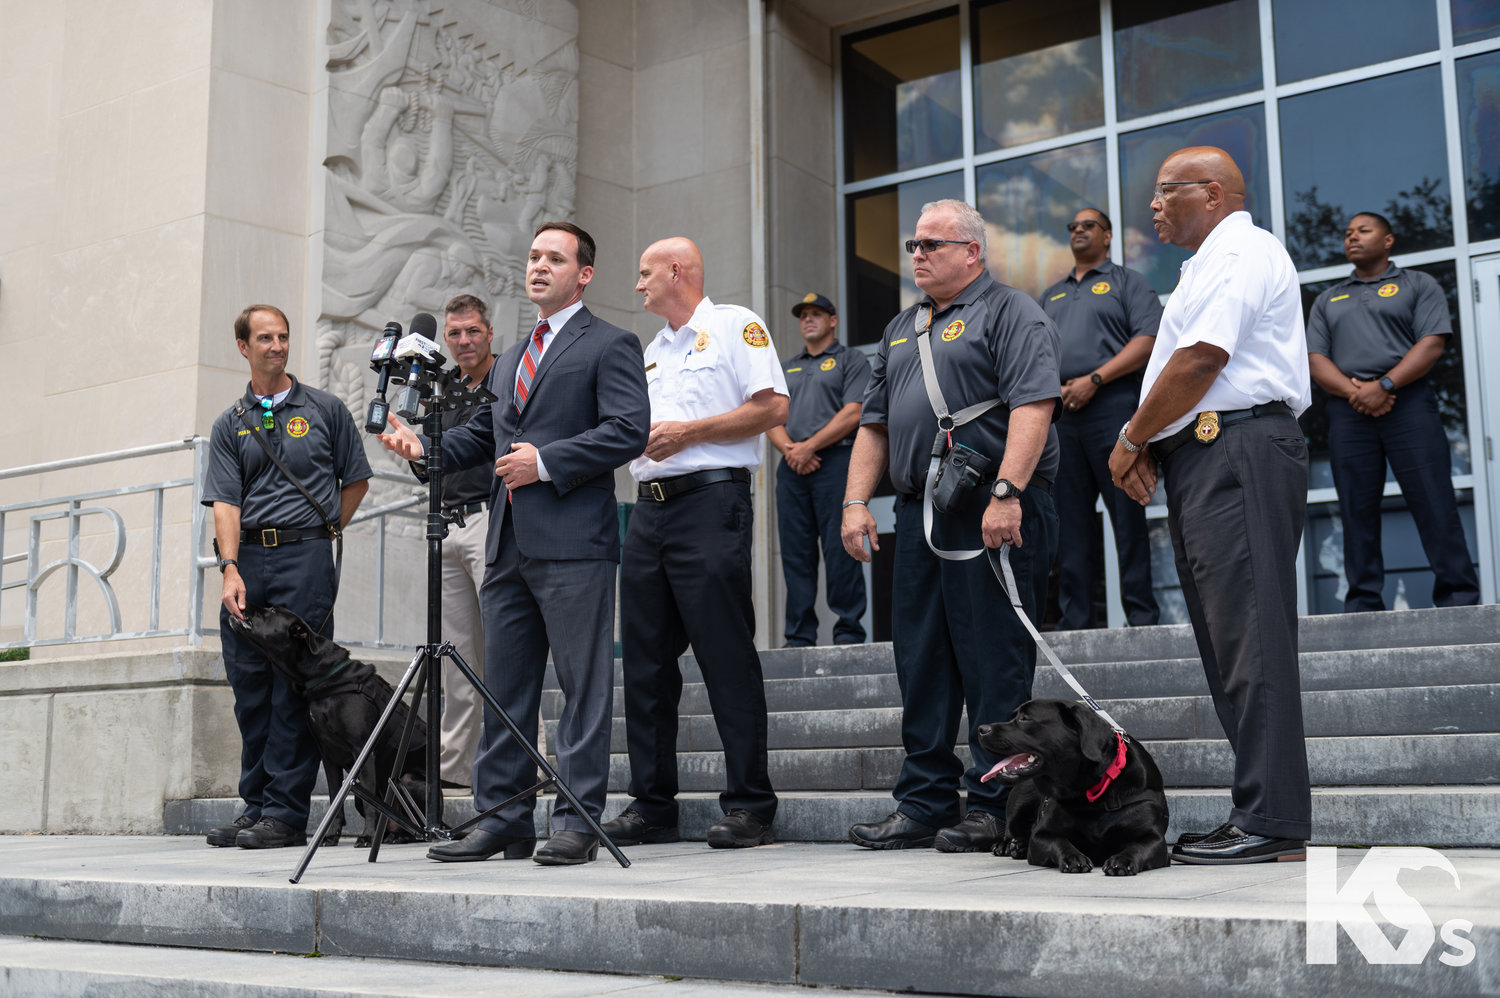 K-9s For Warriors recently announced that it has donated two therapy dogs to the Jacksonville Fire and Rescue Department.